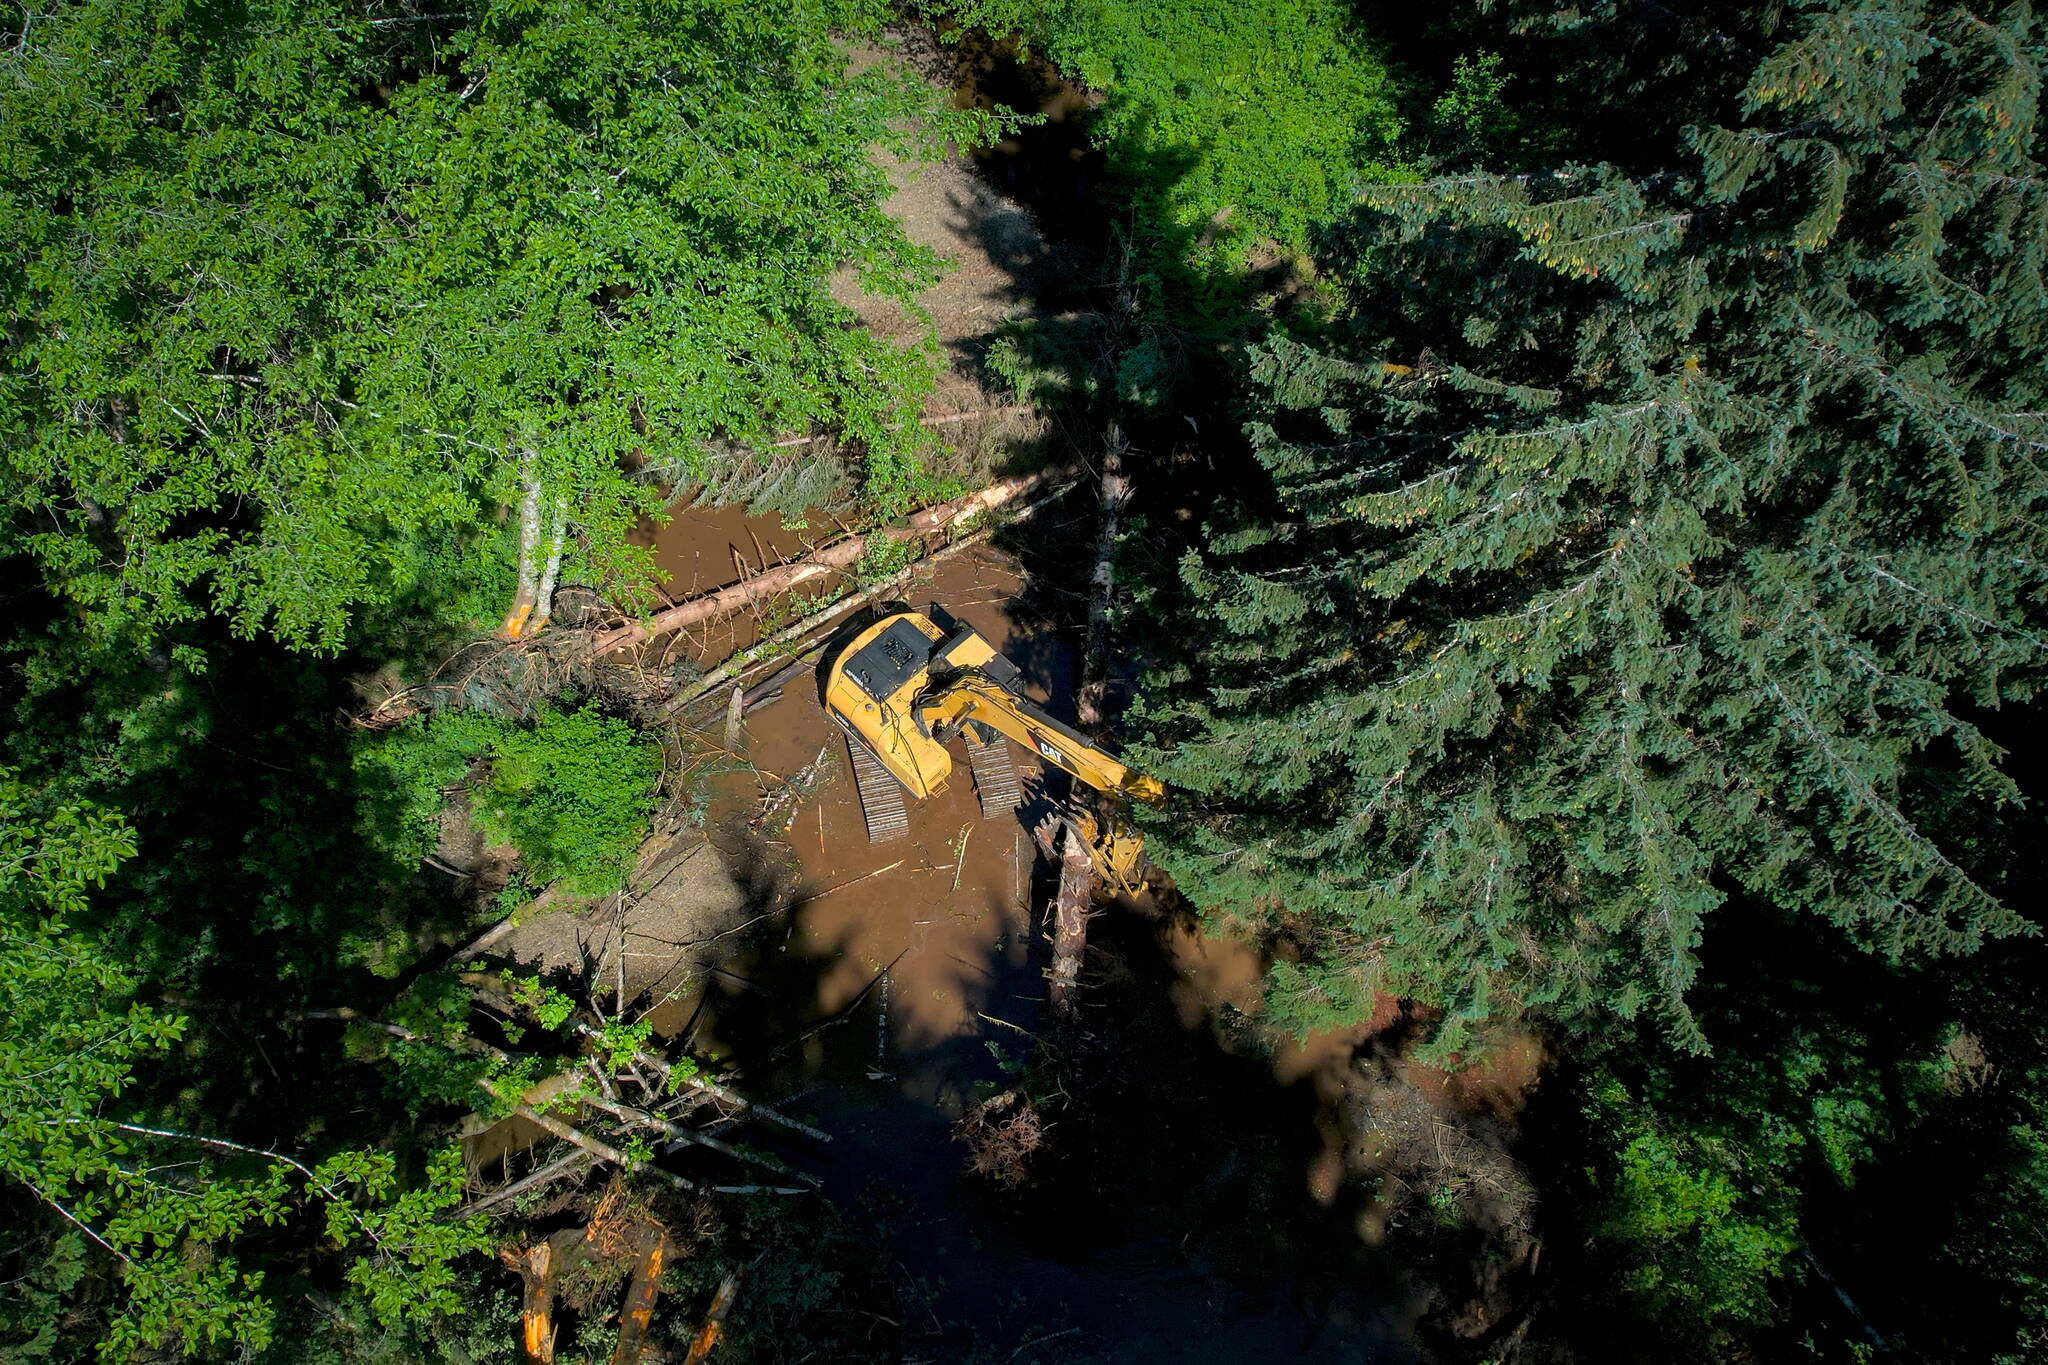 Heavy equipment contractor TM Construction works with the U.S. Forest Service on a stream restoration project in Skanaxhéen on Kuiu Island. Heavy equipment stream restoration is another example of how this regenerative work can create jobs and opportunities throughout the region. This work is done during an “in-stream window” when there will be the least impact to spawning salmon. (Photo by Lee House)